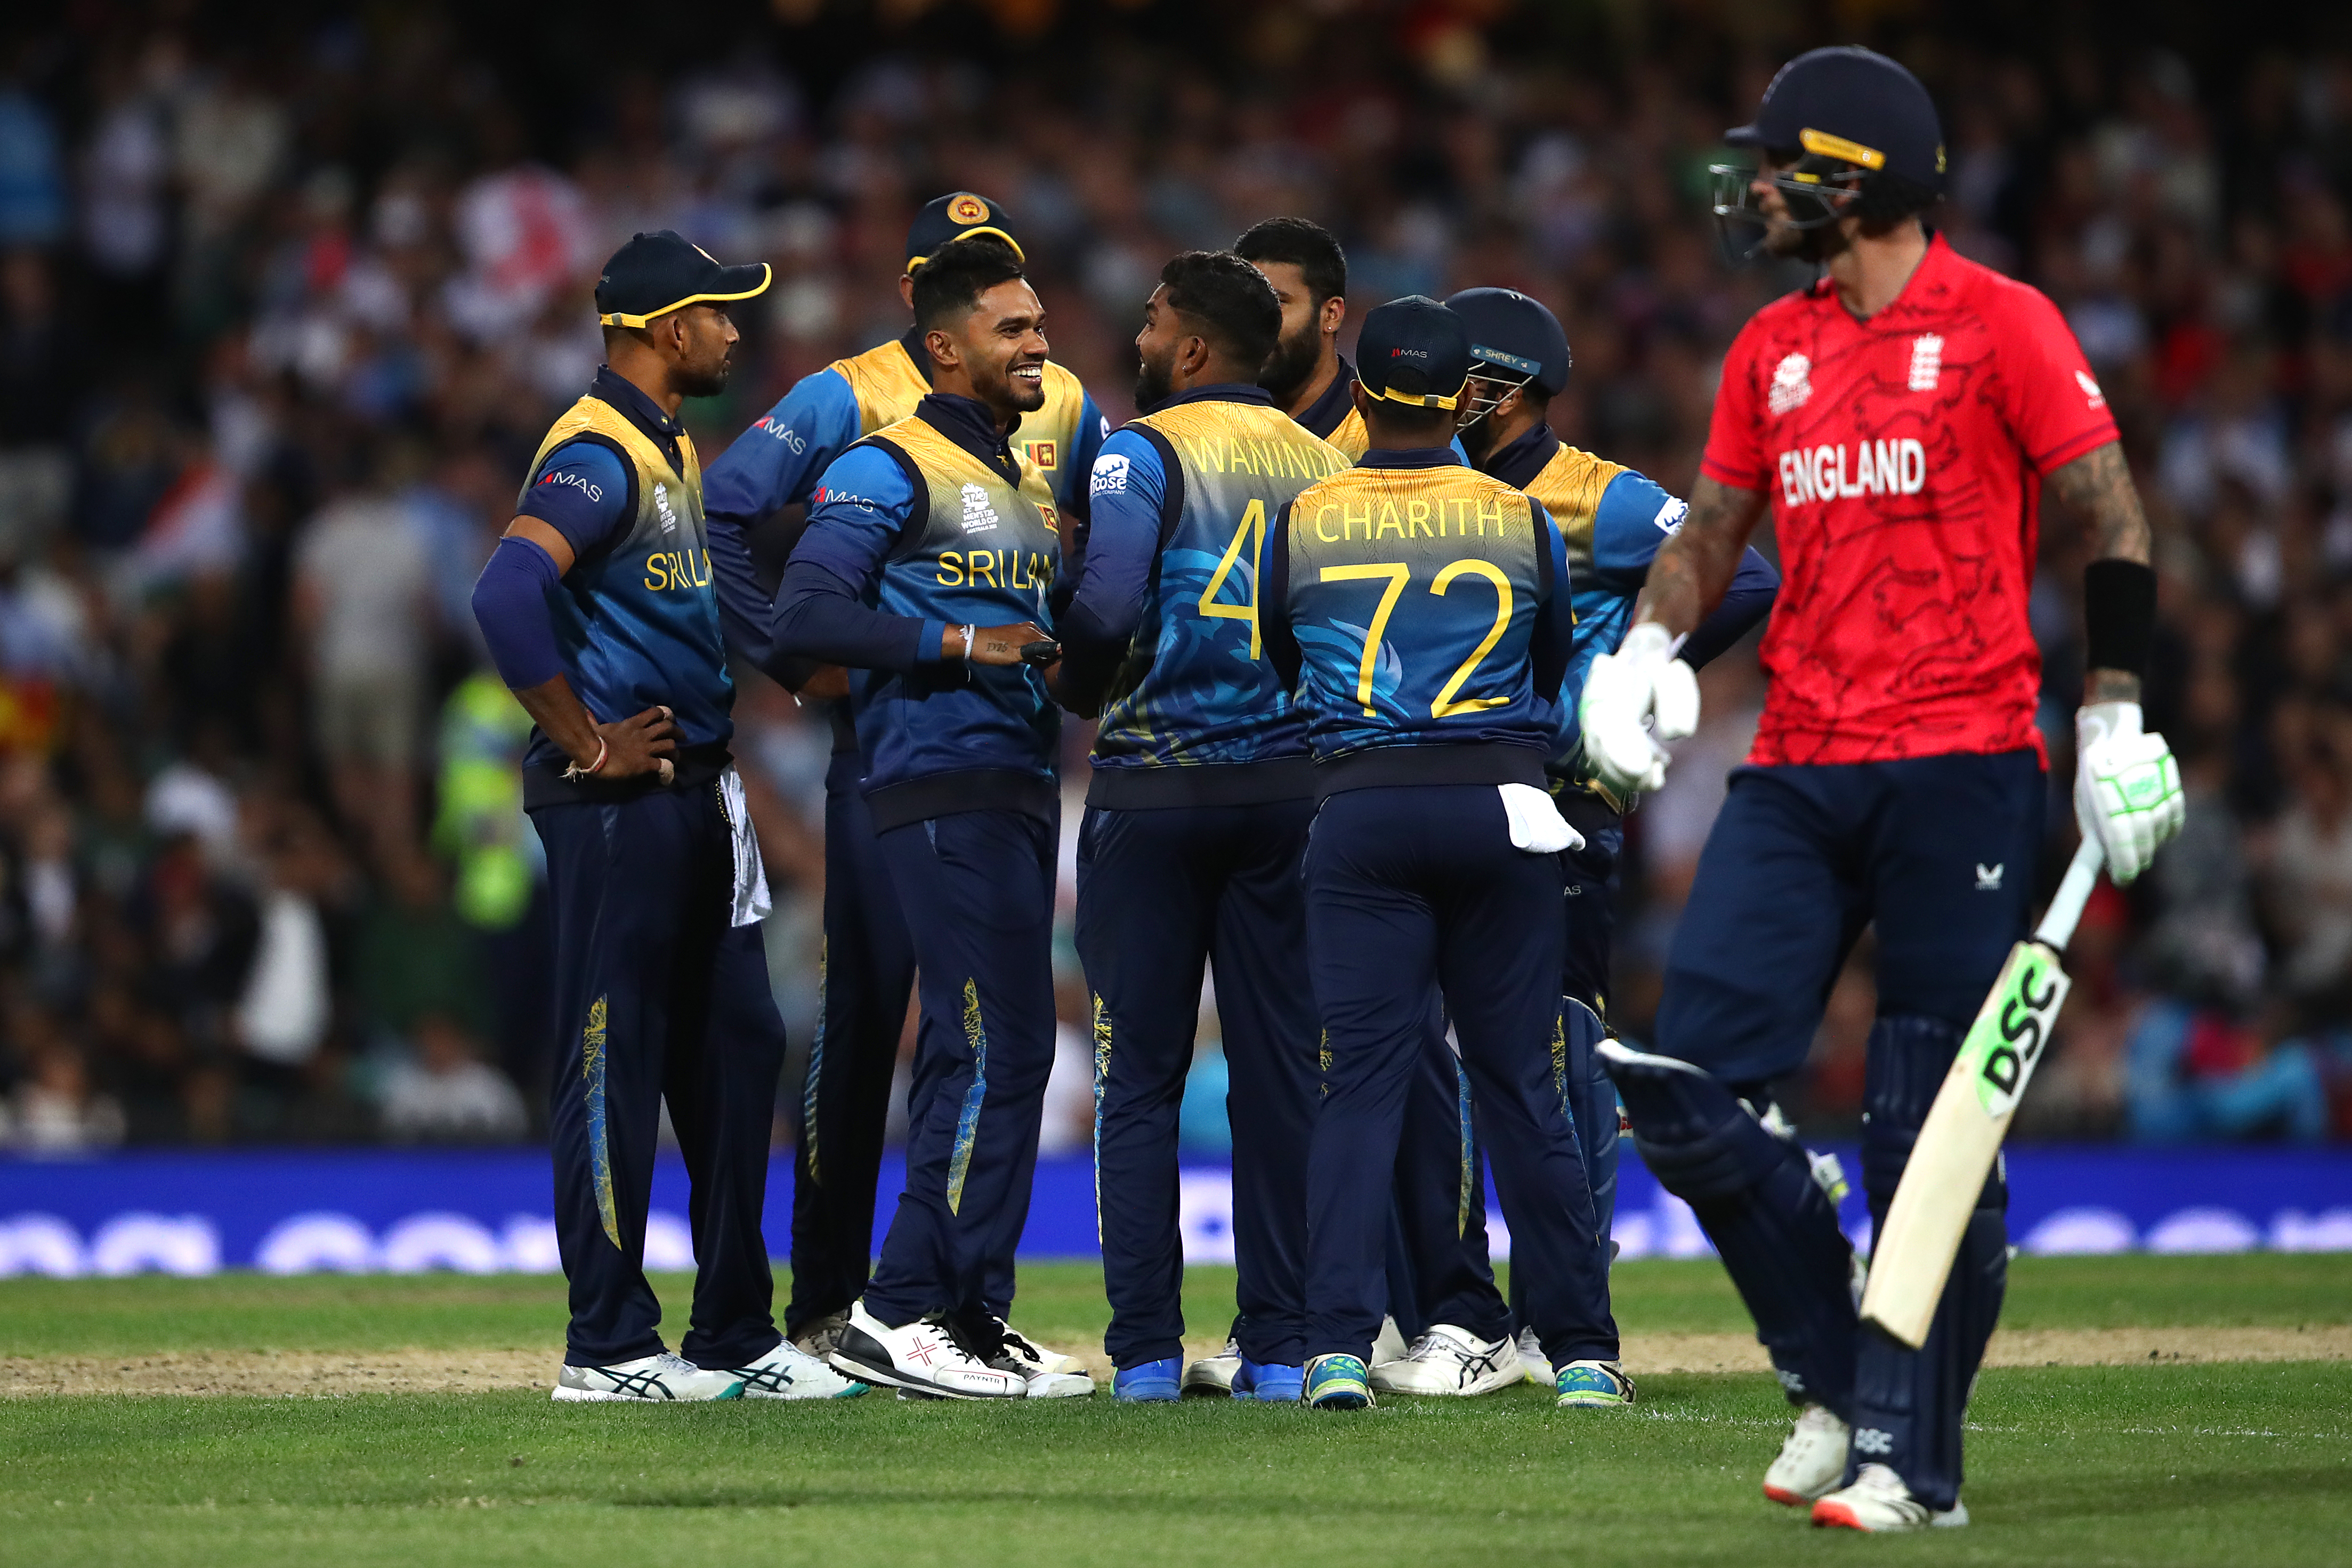 , Ben Stokes keeps cool amid collapse as England scrape past Sri Lanka to reach World Cup semis and knock Australia out